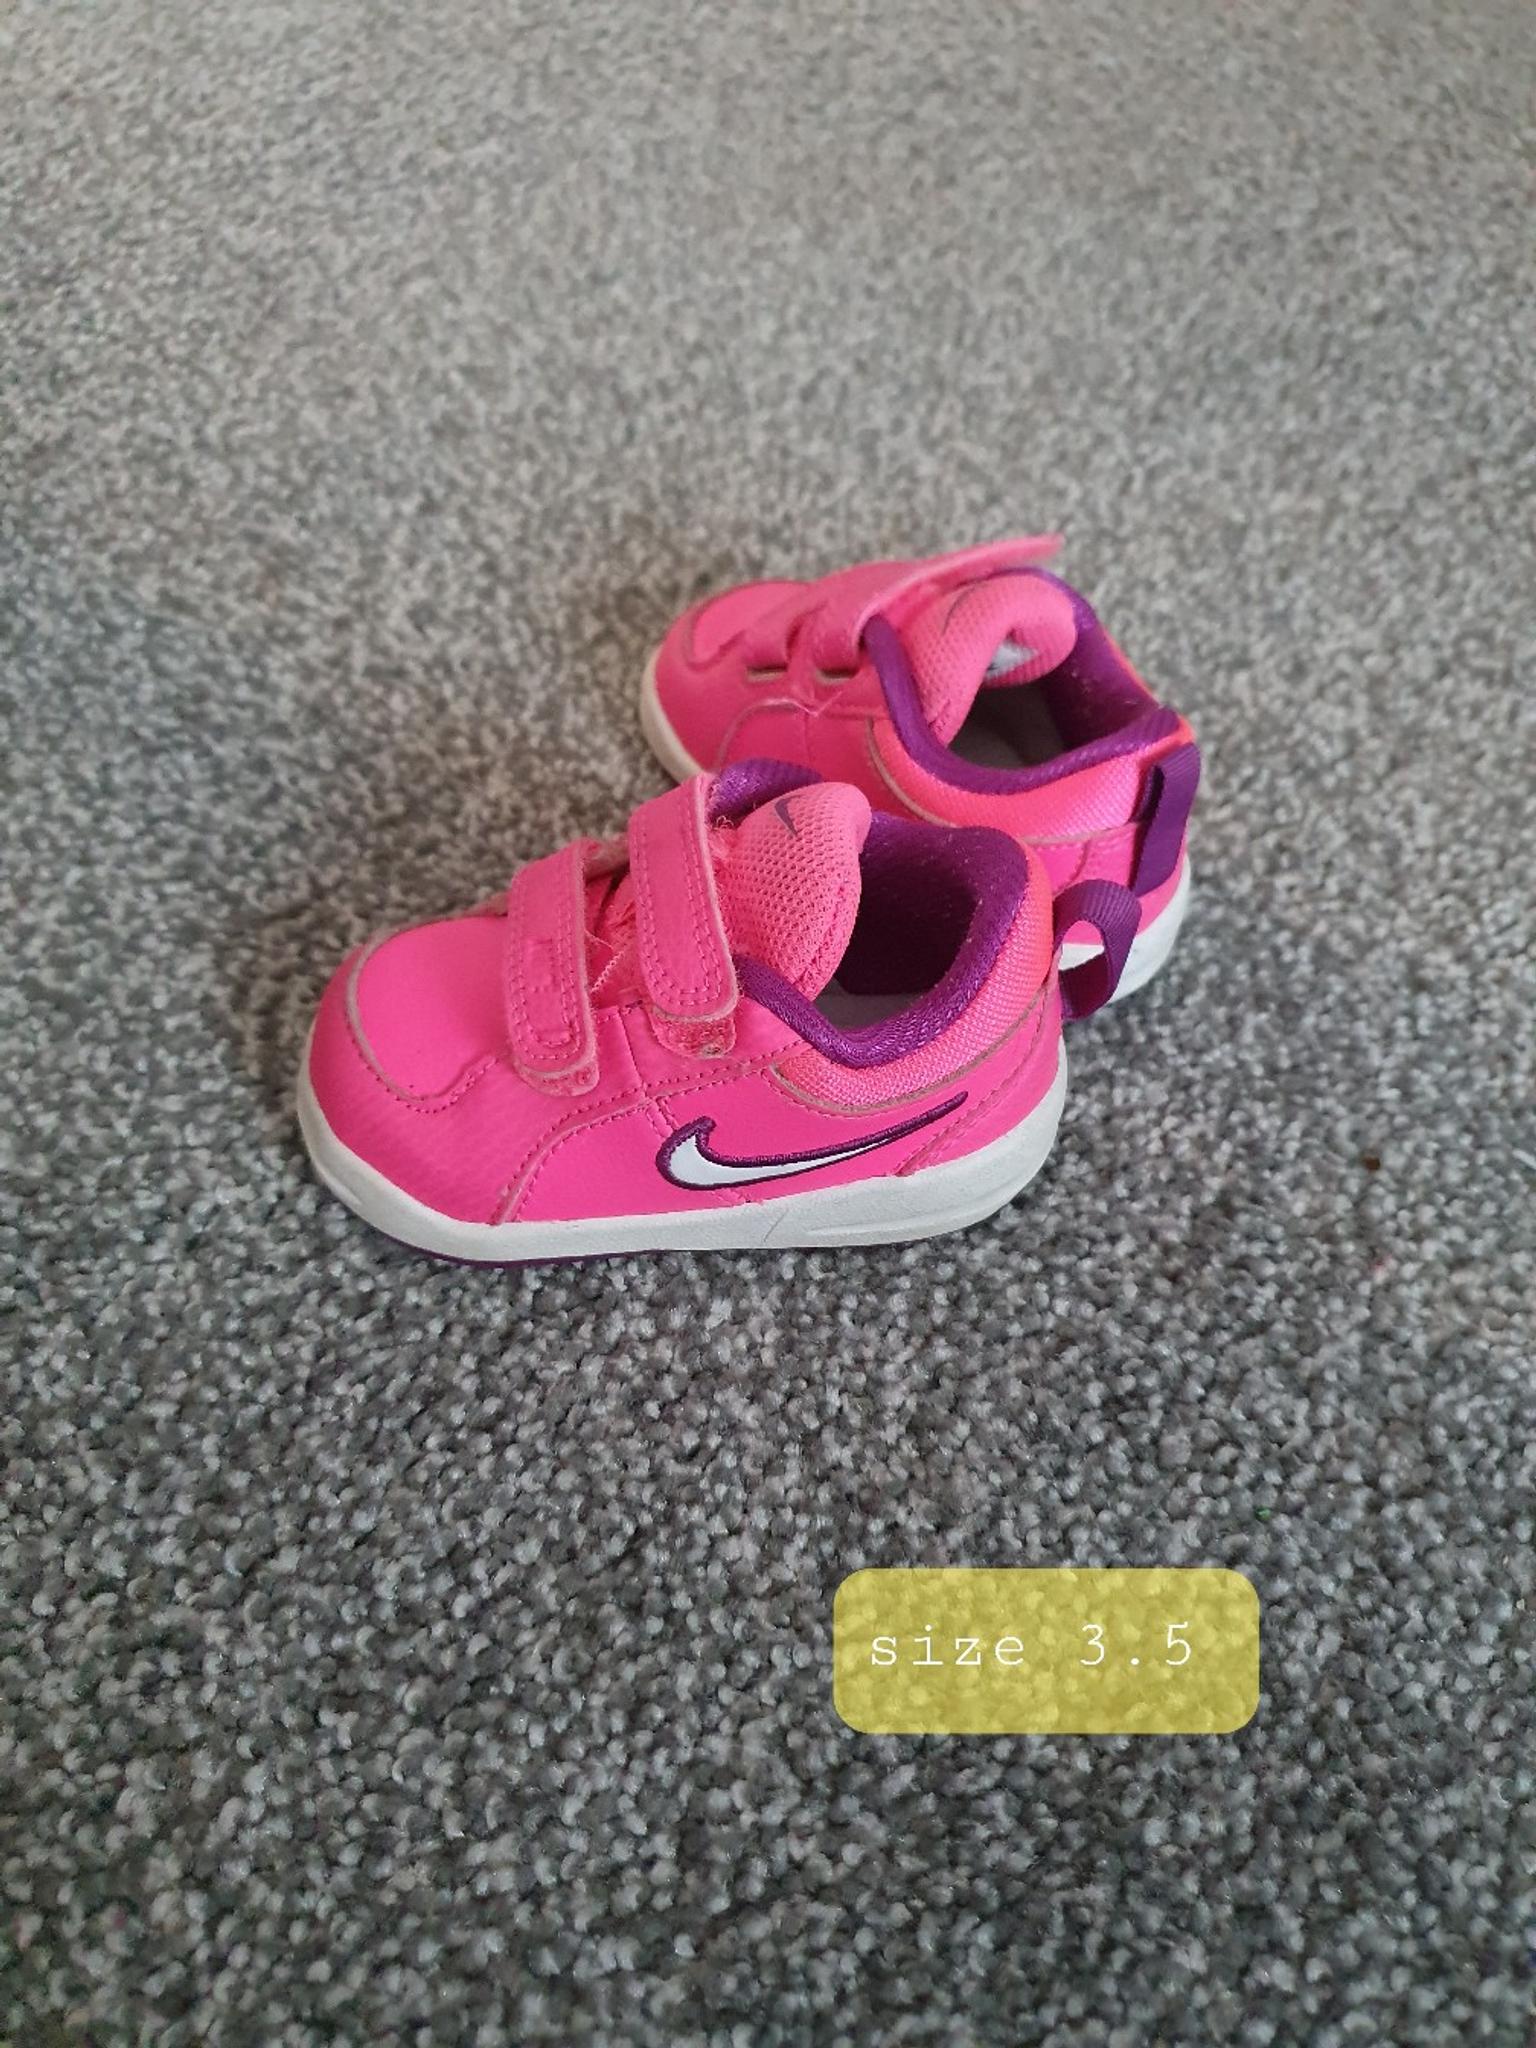 nike shoes for baby girl